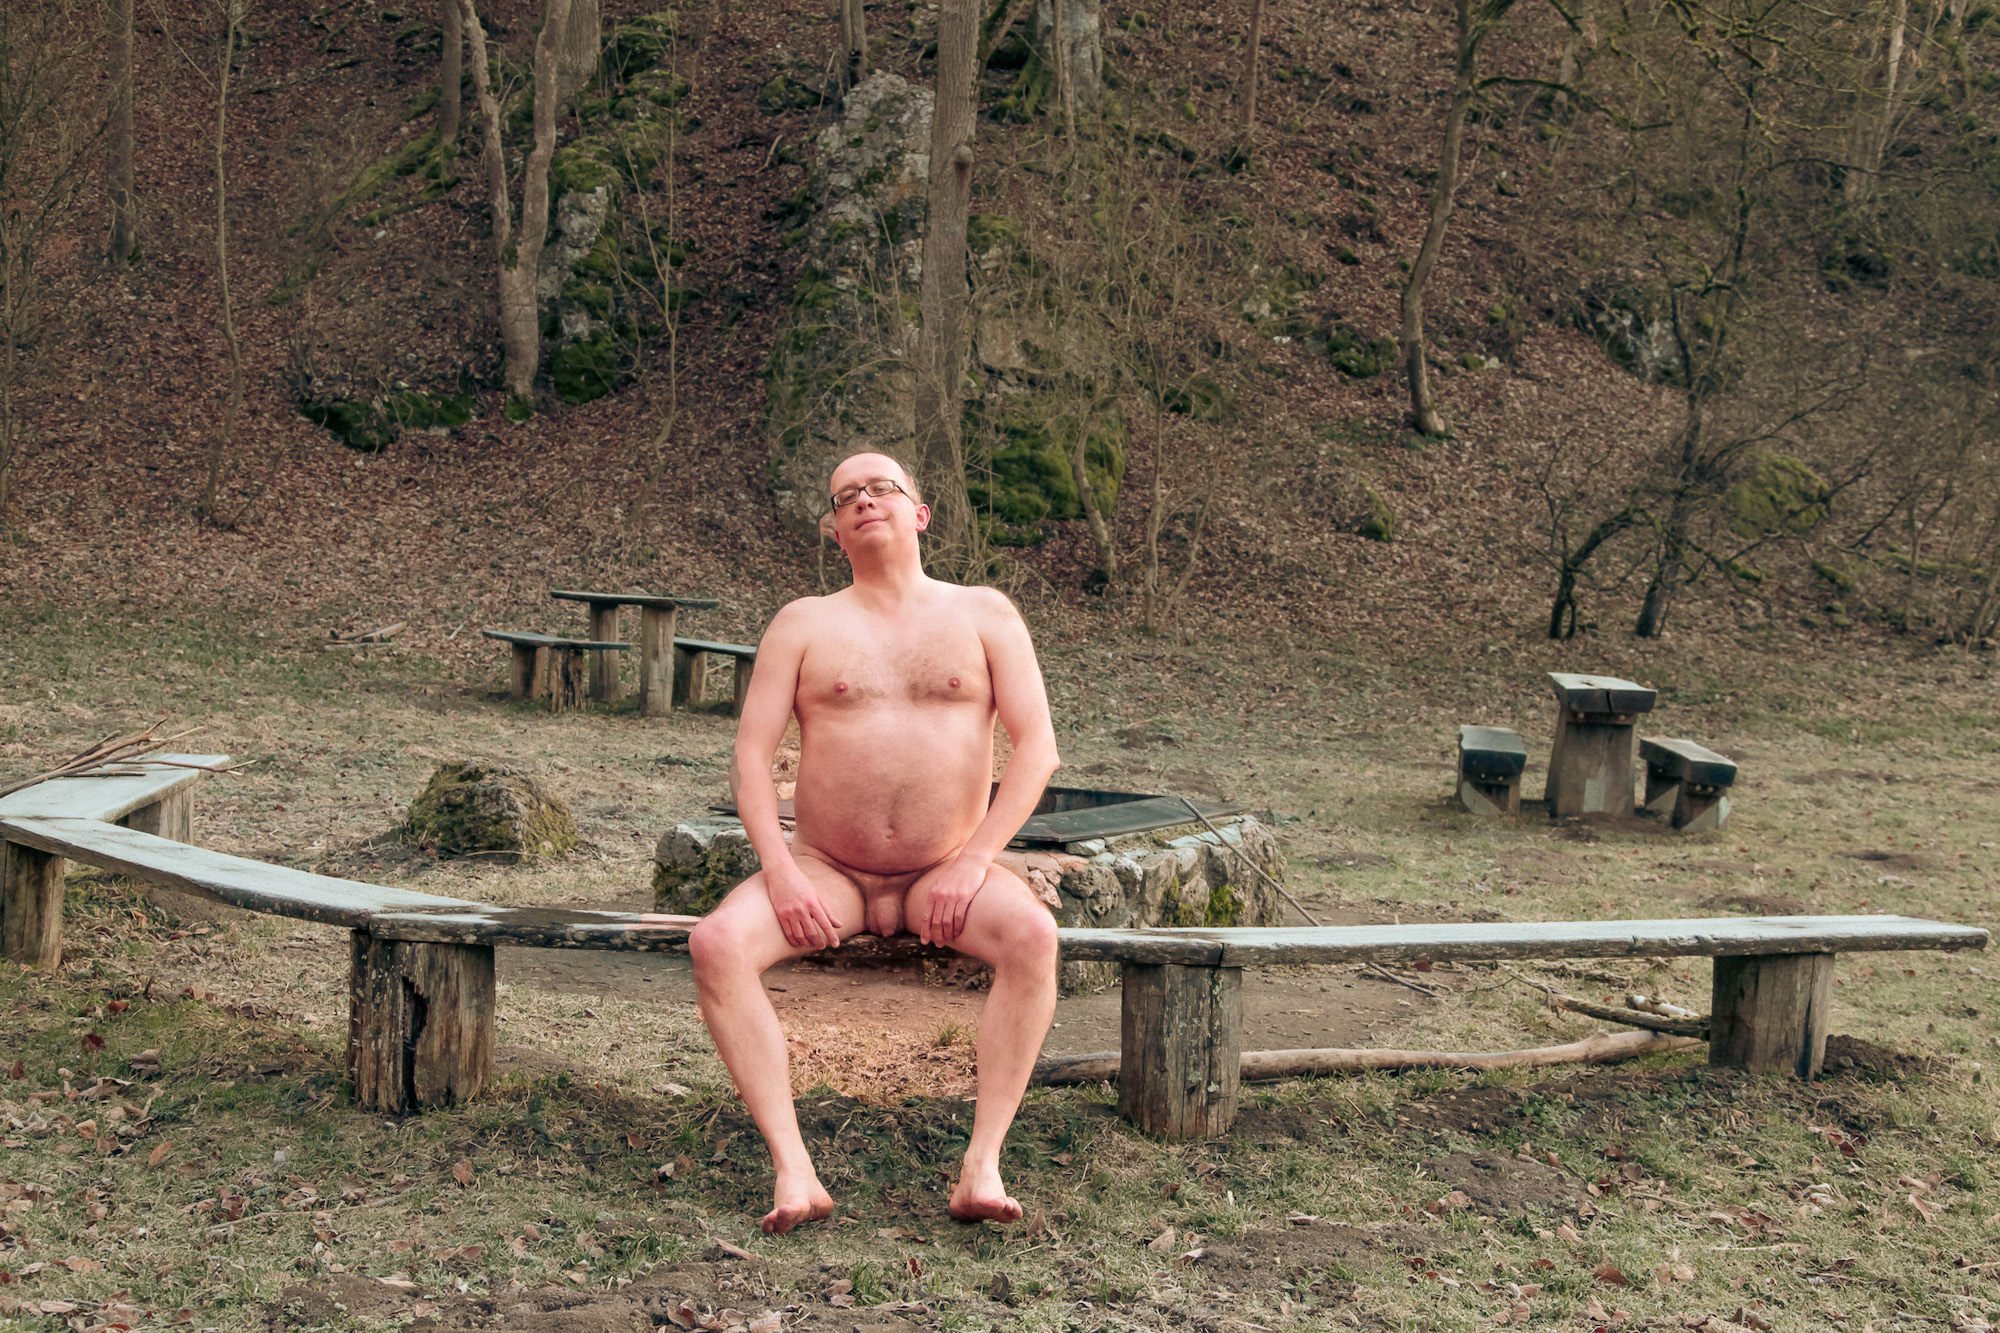 Male nude at picnic area in Germany